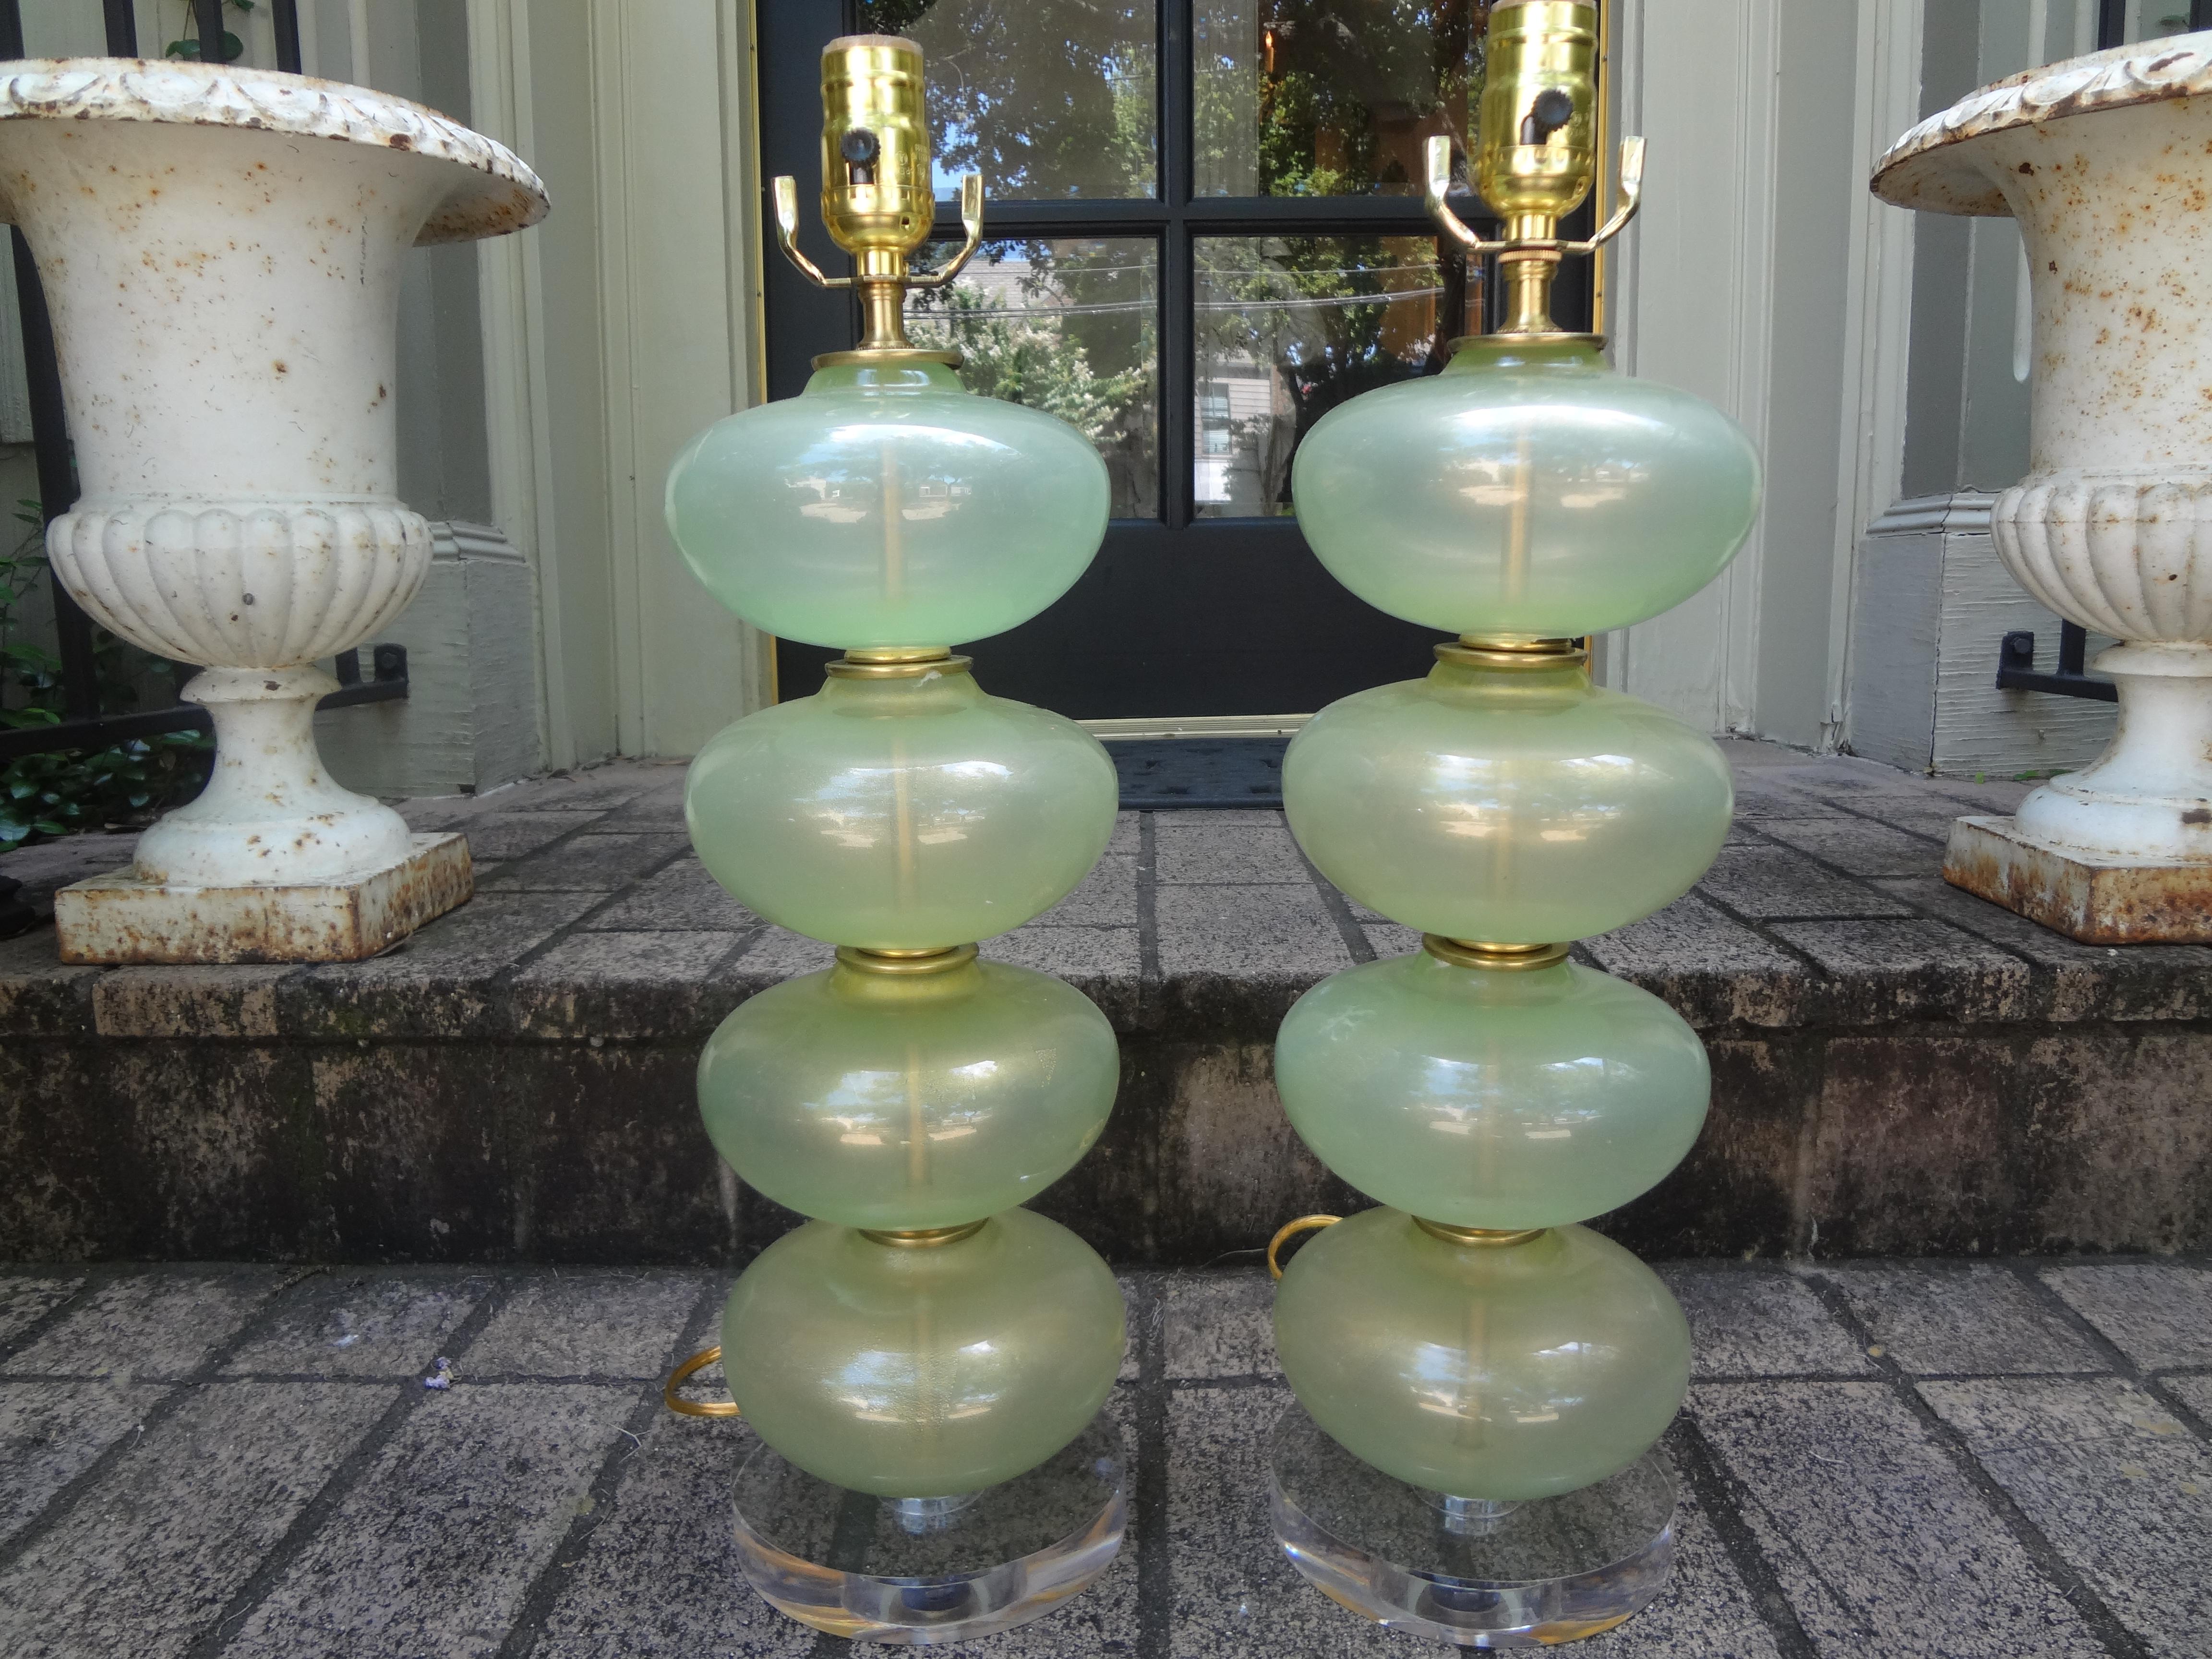 Fabulous pair of Mid-Century Murano glass lamps in celadon green or sea foam green with gold inclusions. These stunning Hollywood Regency murano glass stacked ball or stacked sphere lamps are comprised of 4 large glass spheres and brass accents